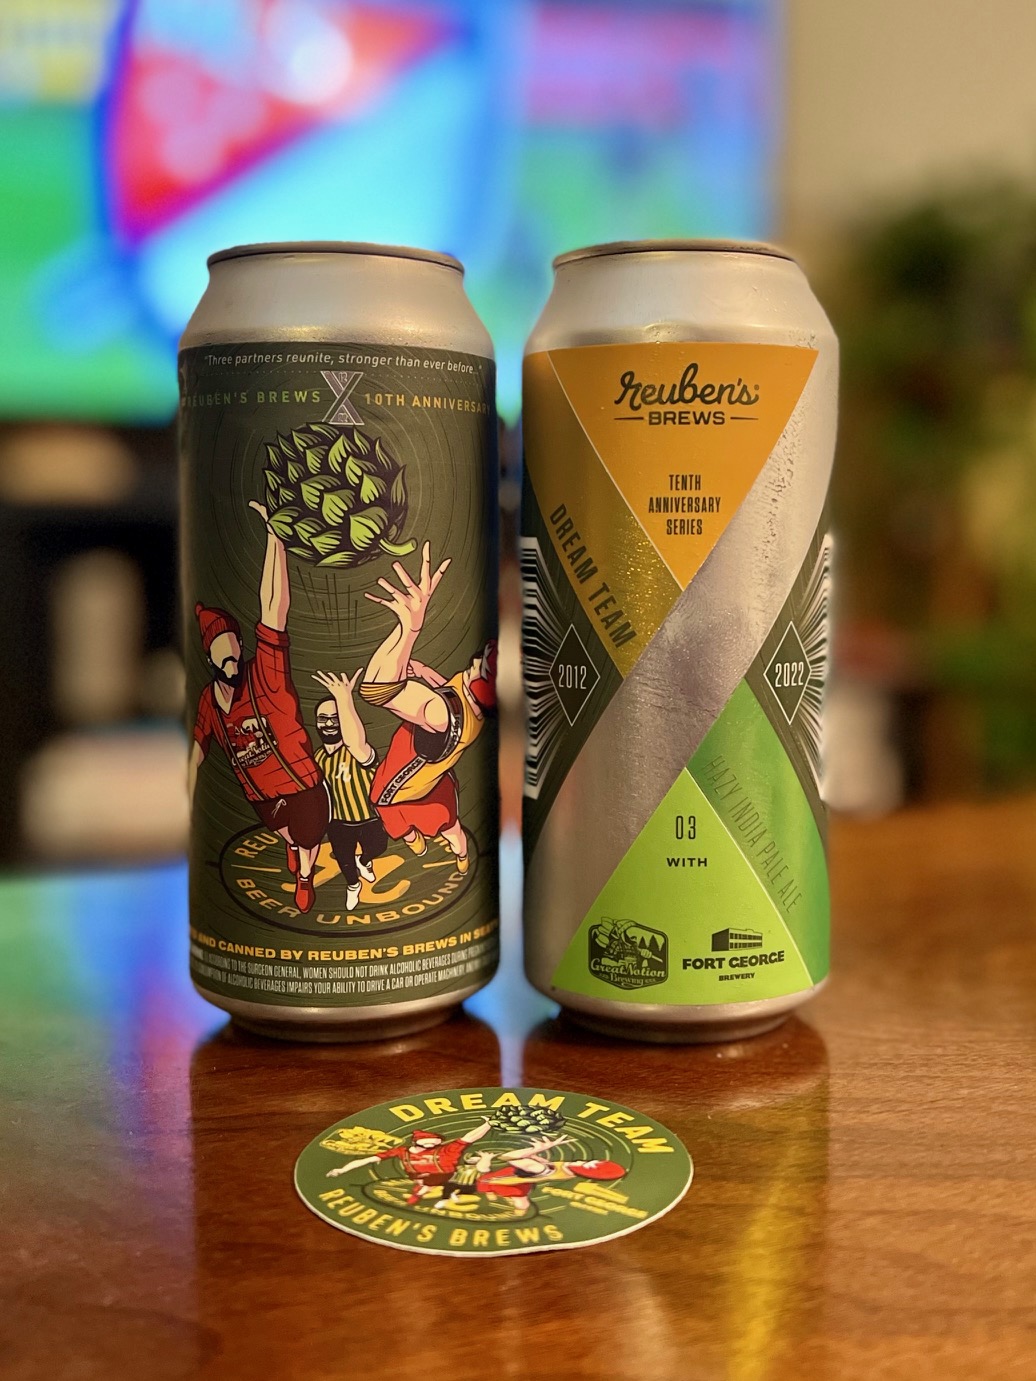 Reuben’s Brews returns with Fort George Brewery and Great Notion Brewing for Dream Team Hazy IPA.